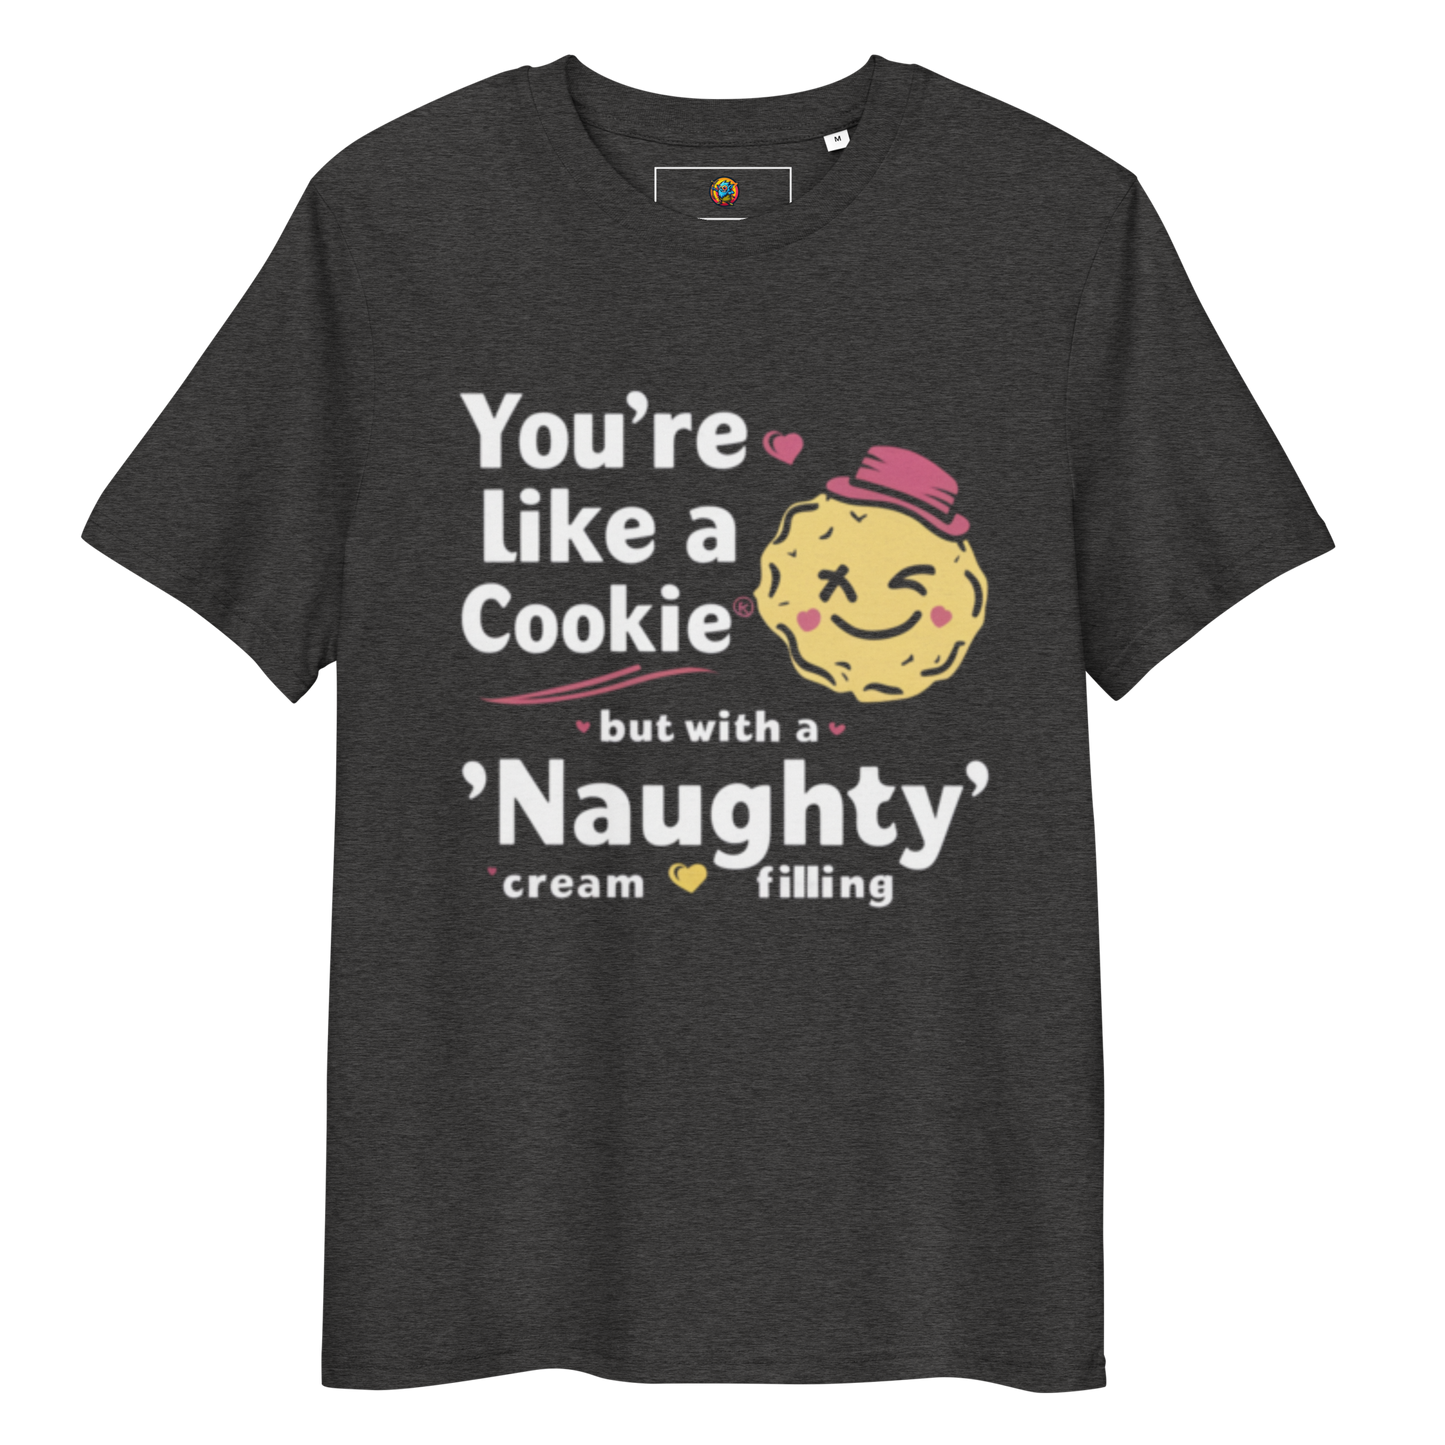 You're like a cookie, but with a naughty cream filling - Unisex organic cotton t-shirt